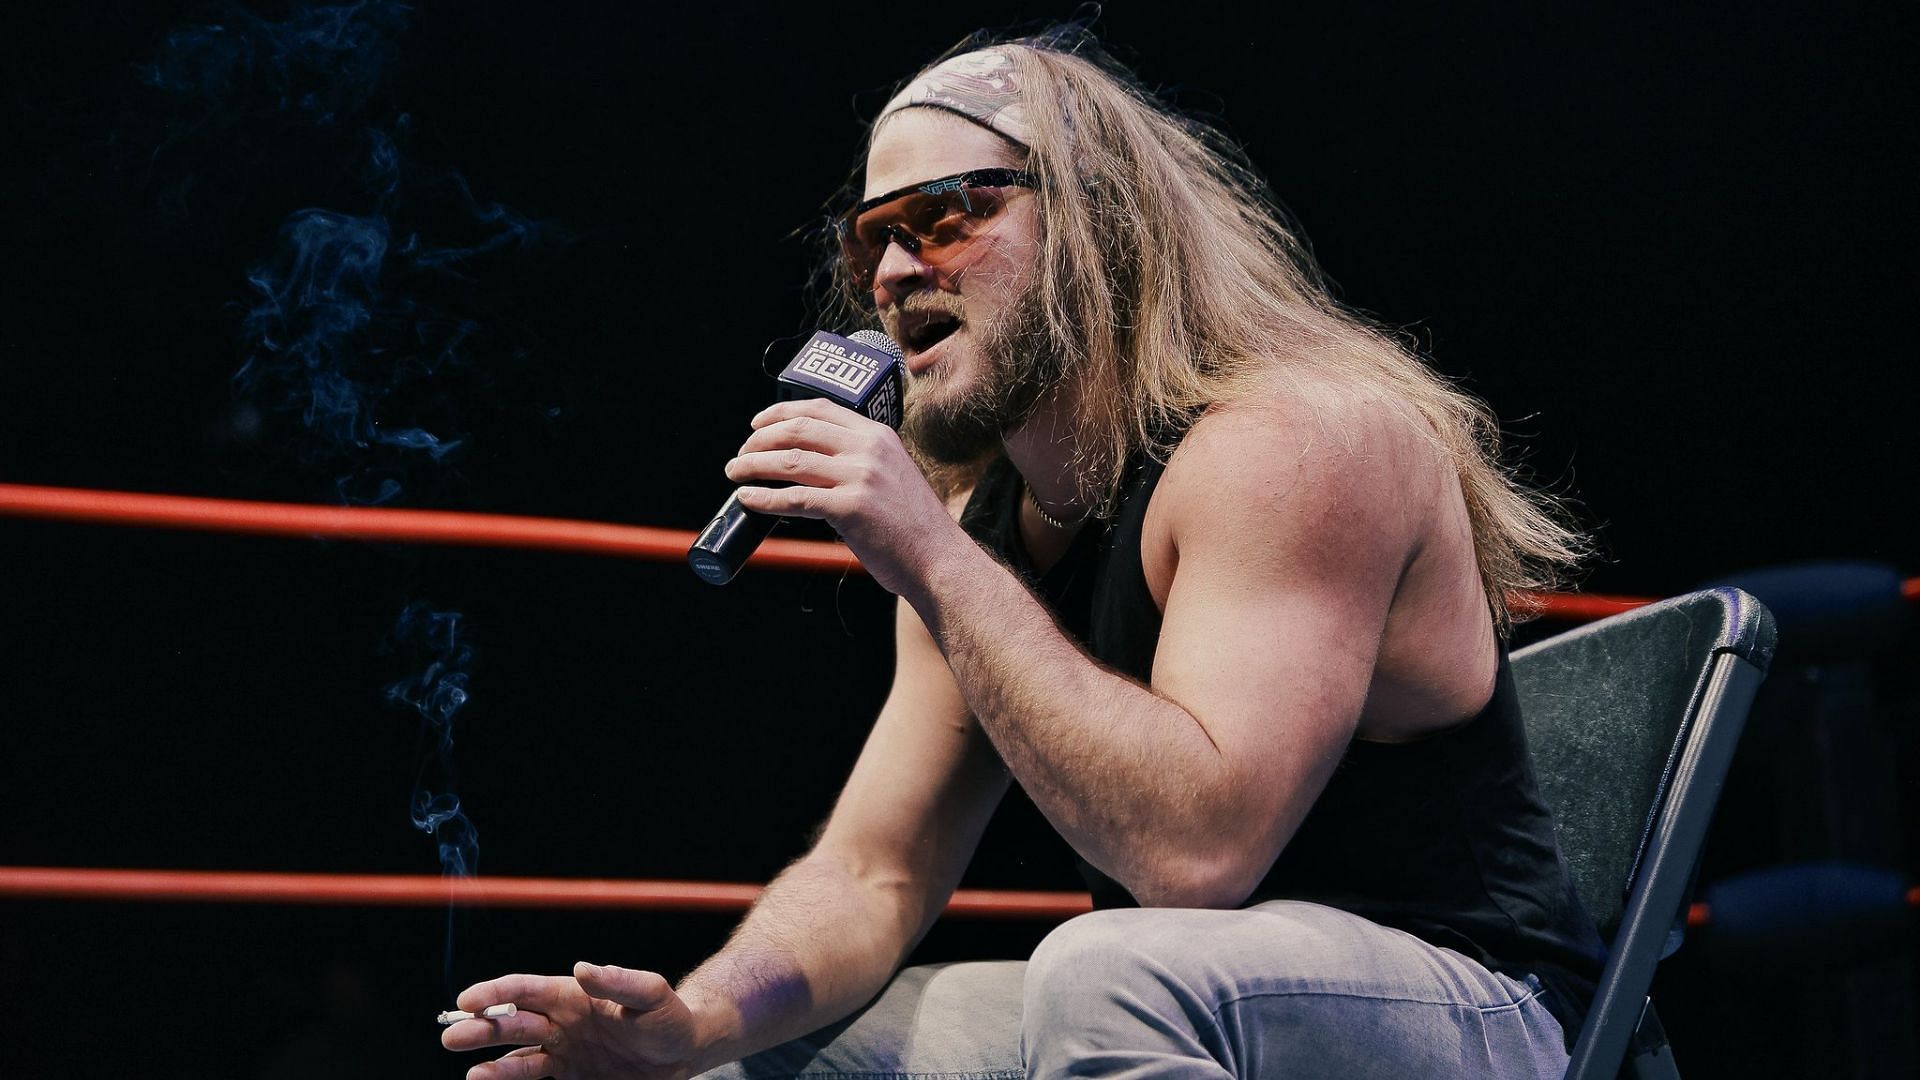 Joey Janela at a GCW event in 2022